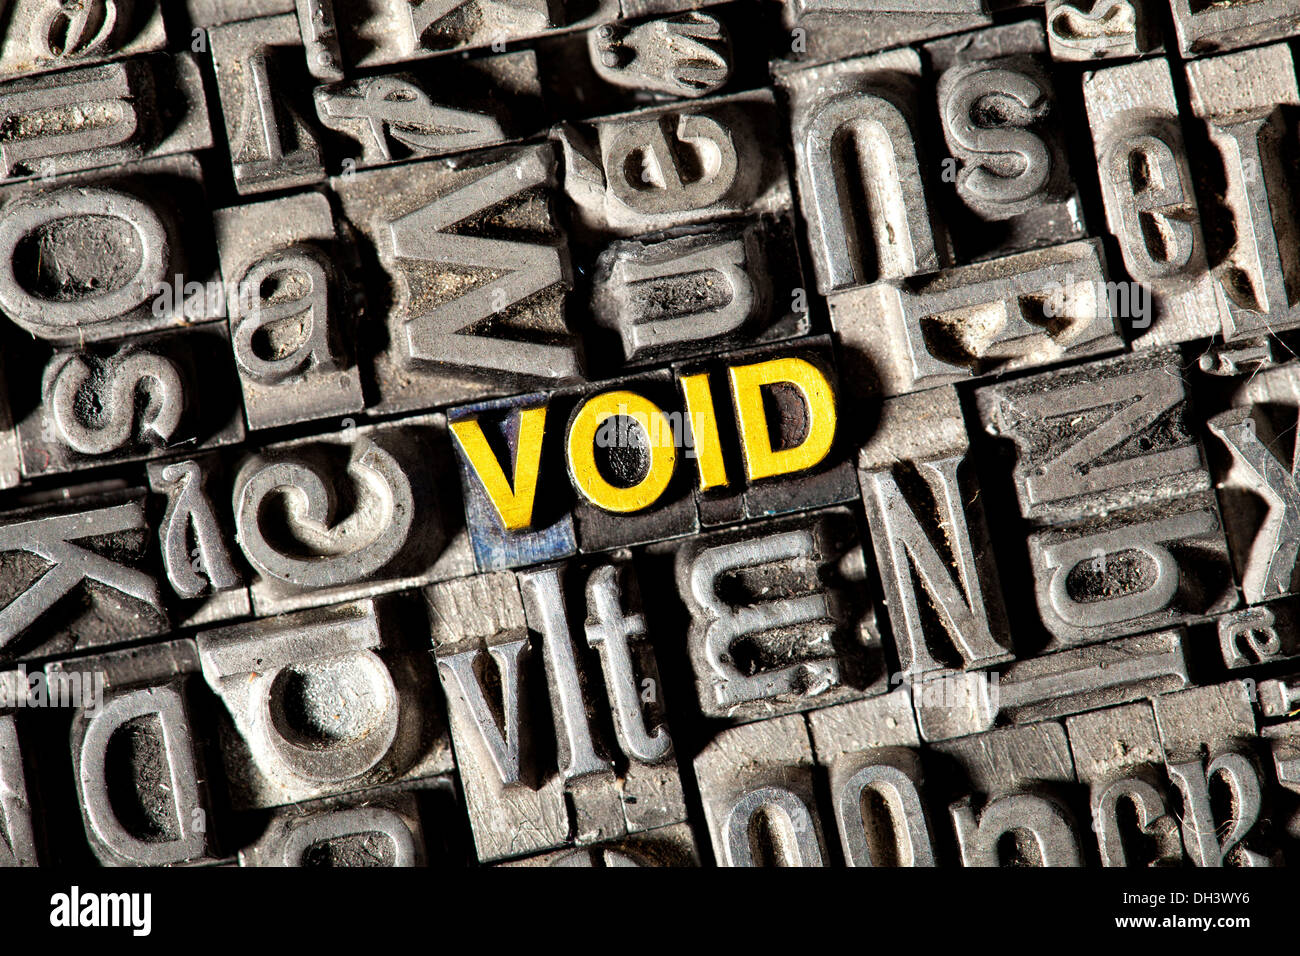 Old lead letters forming the word Void Stock Photo